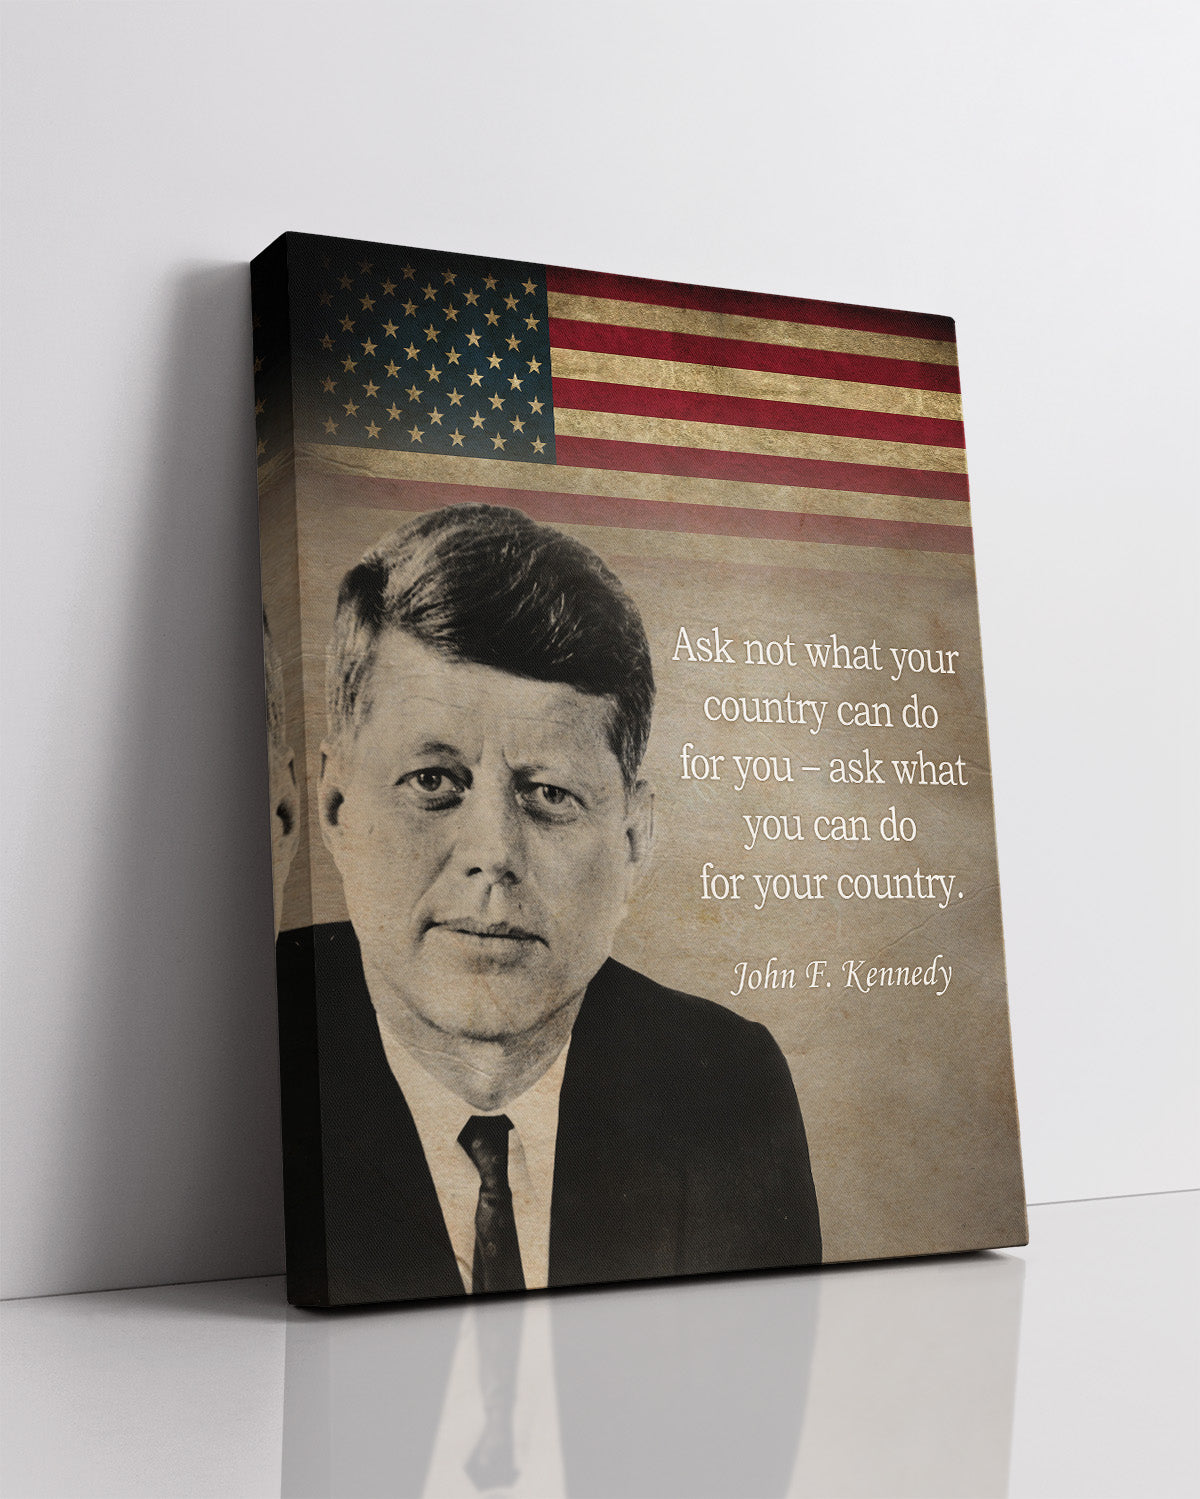 John F. Kennedy Historic Quote - Ask not what your country - Great Inspirational Gift - Motivational Print - American Patriotic President